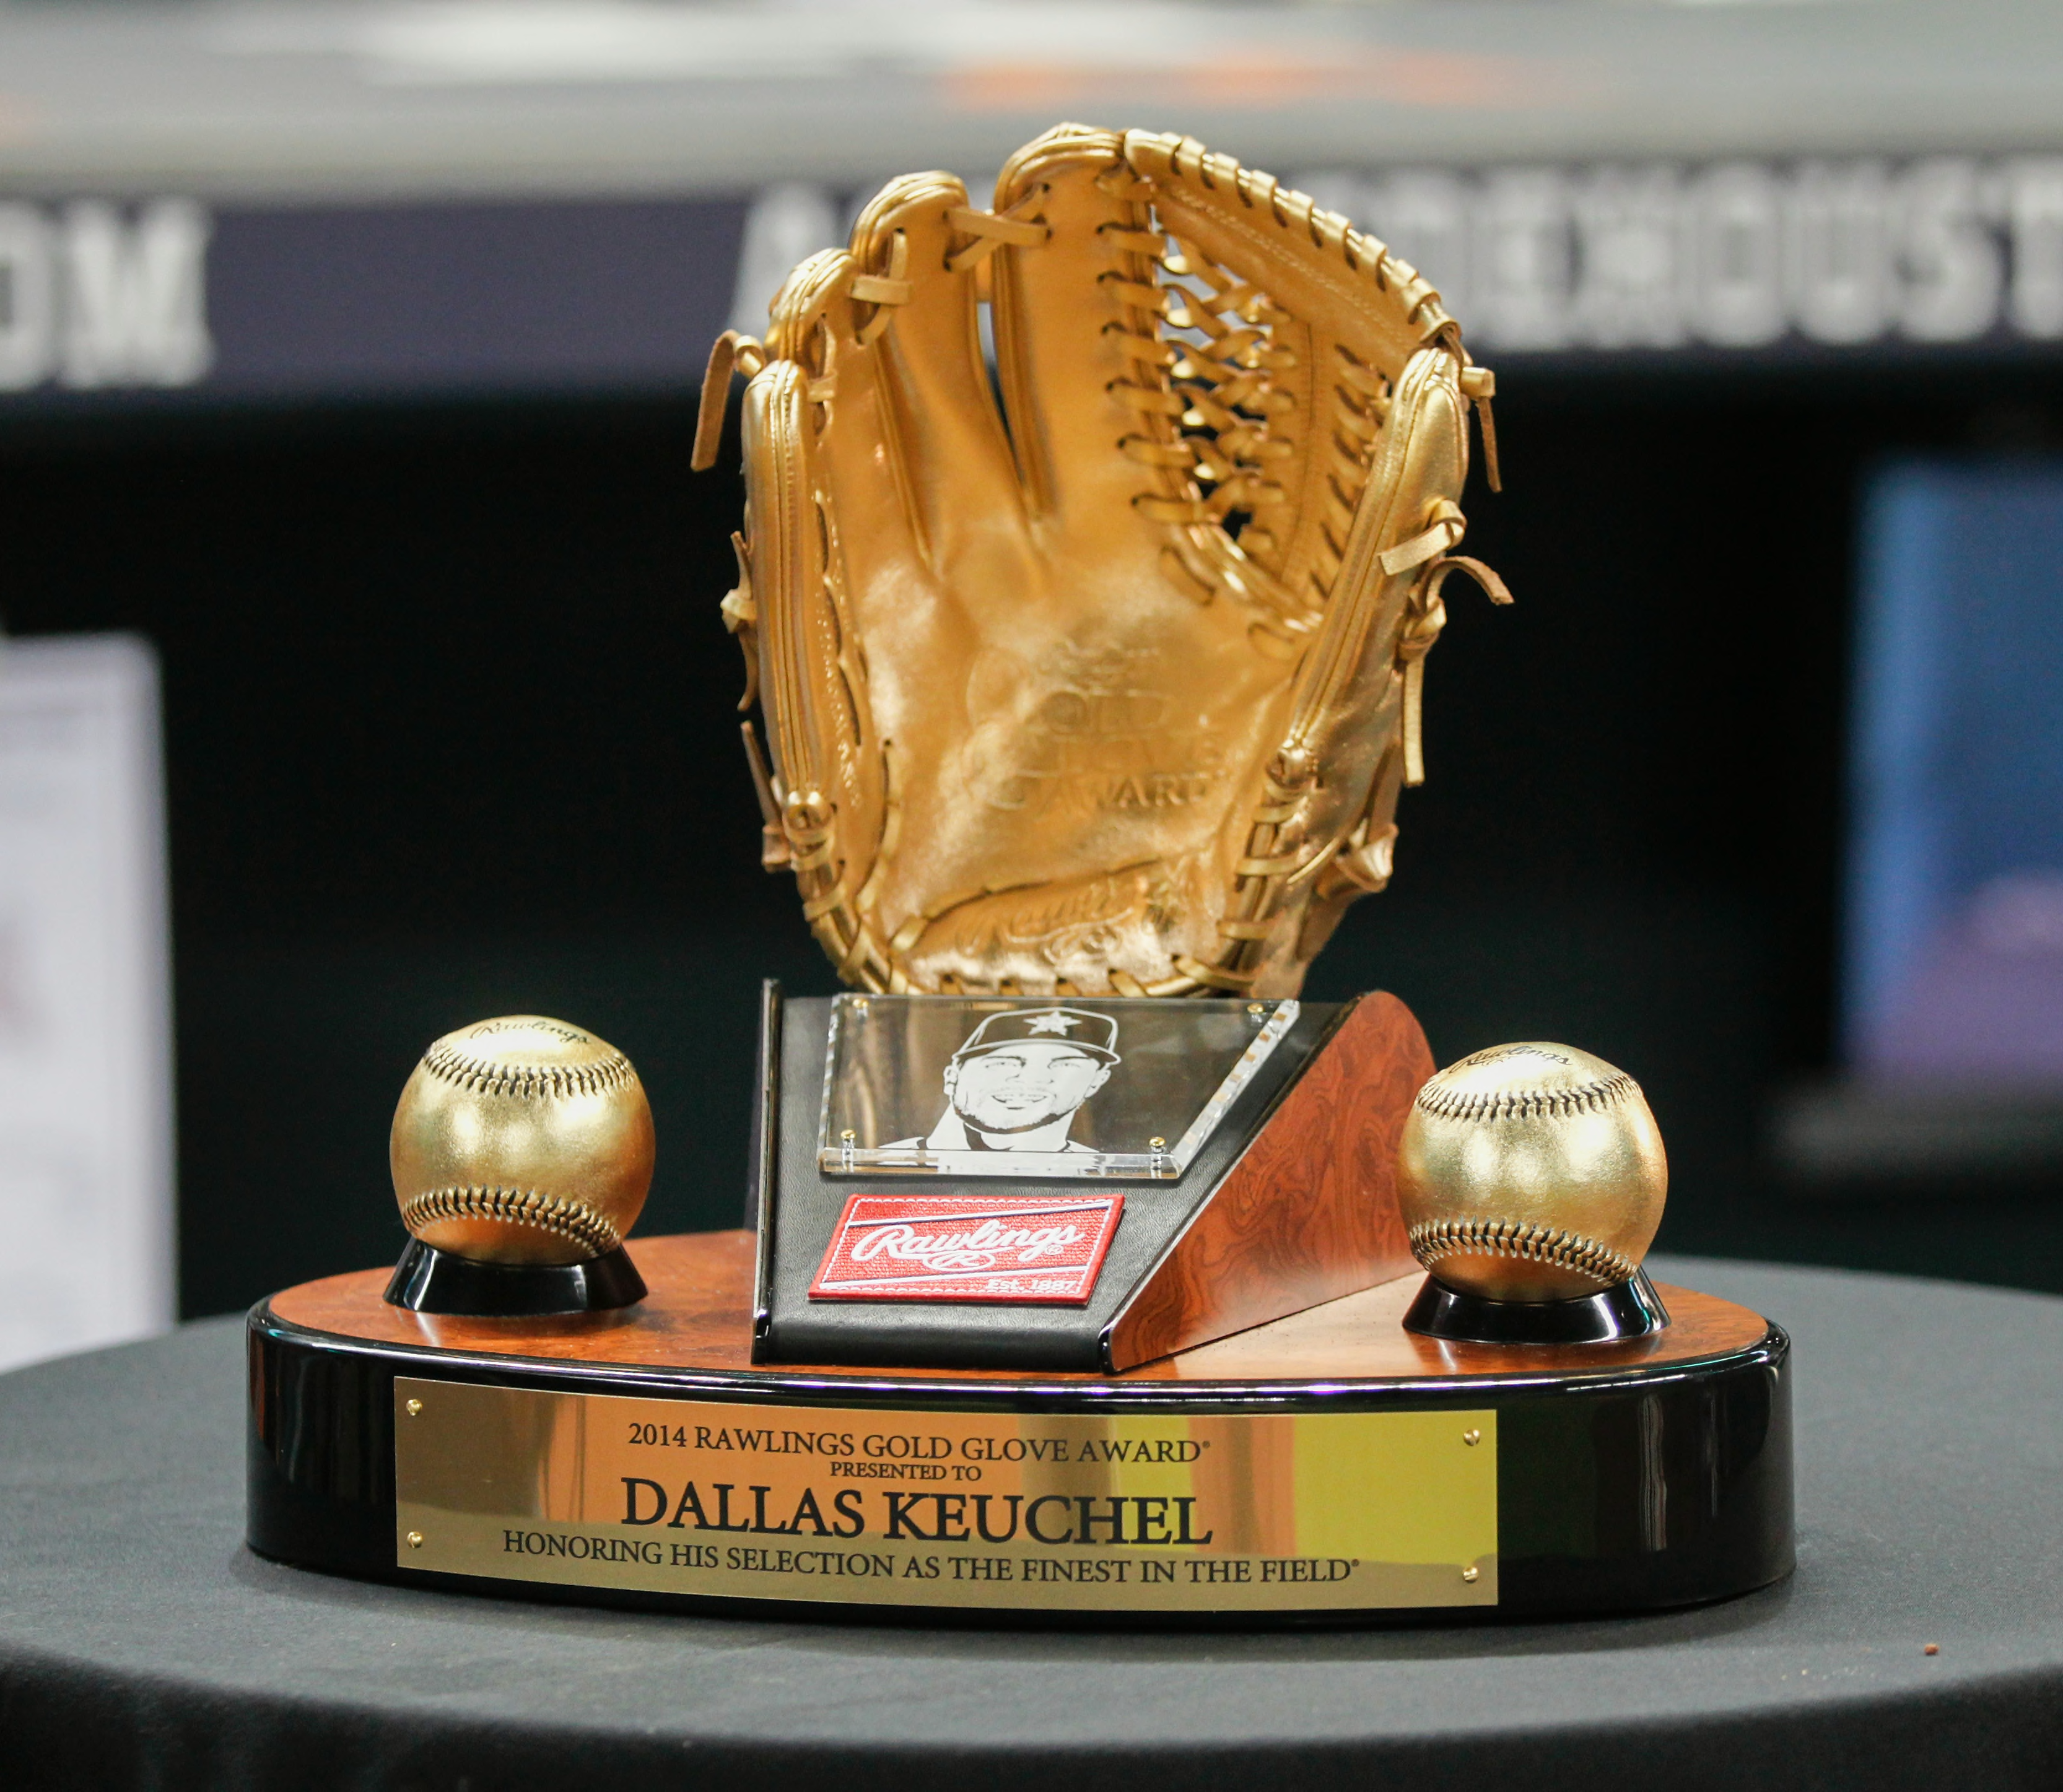 Most Gold Gloves Career Images Gloves and Descriptions